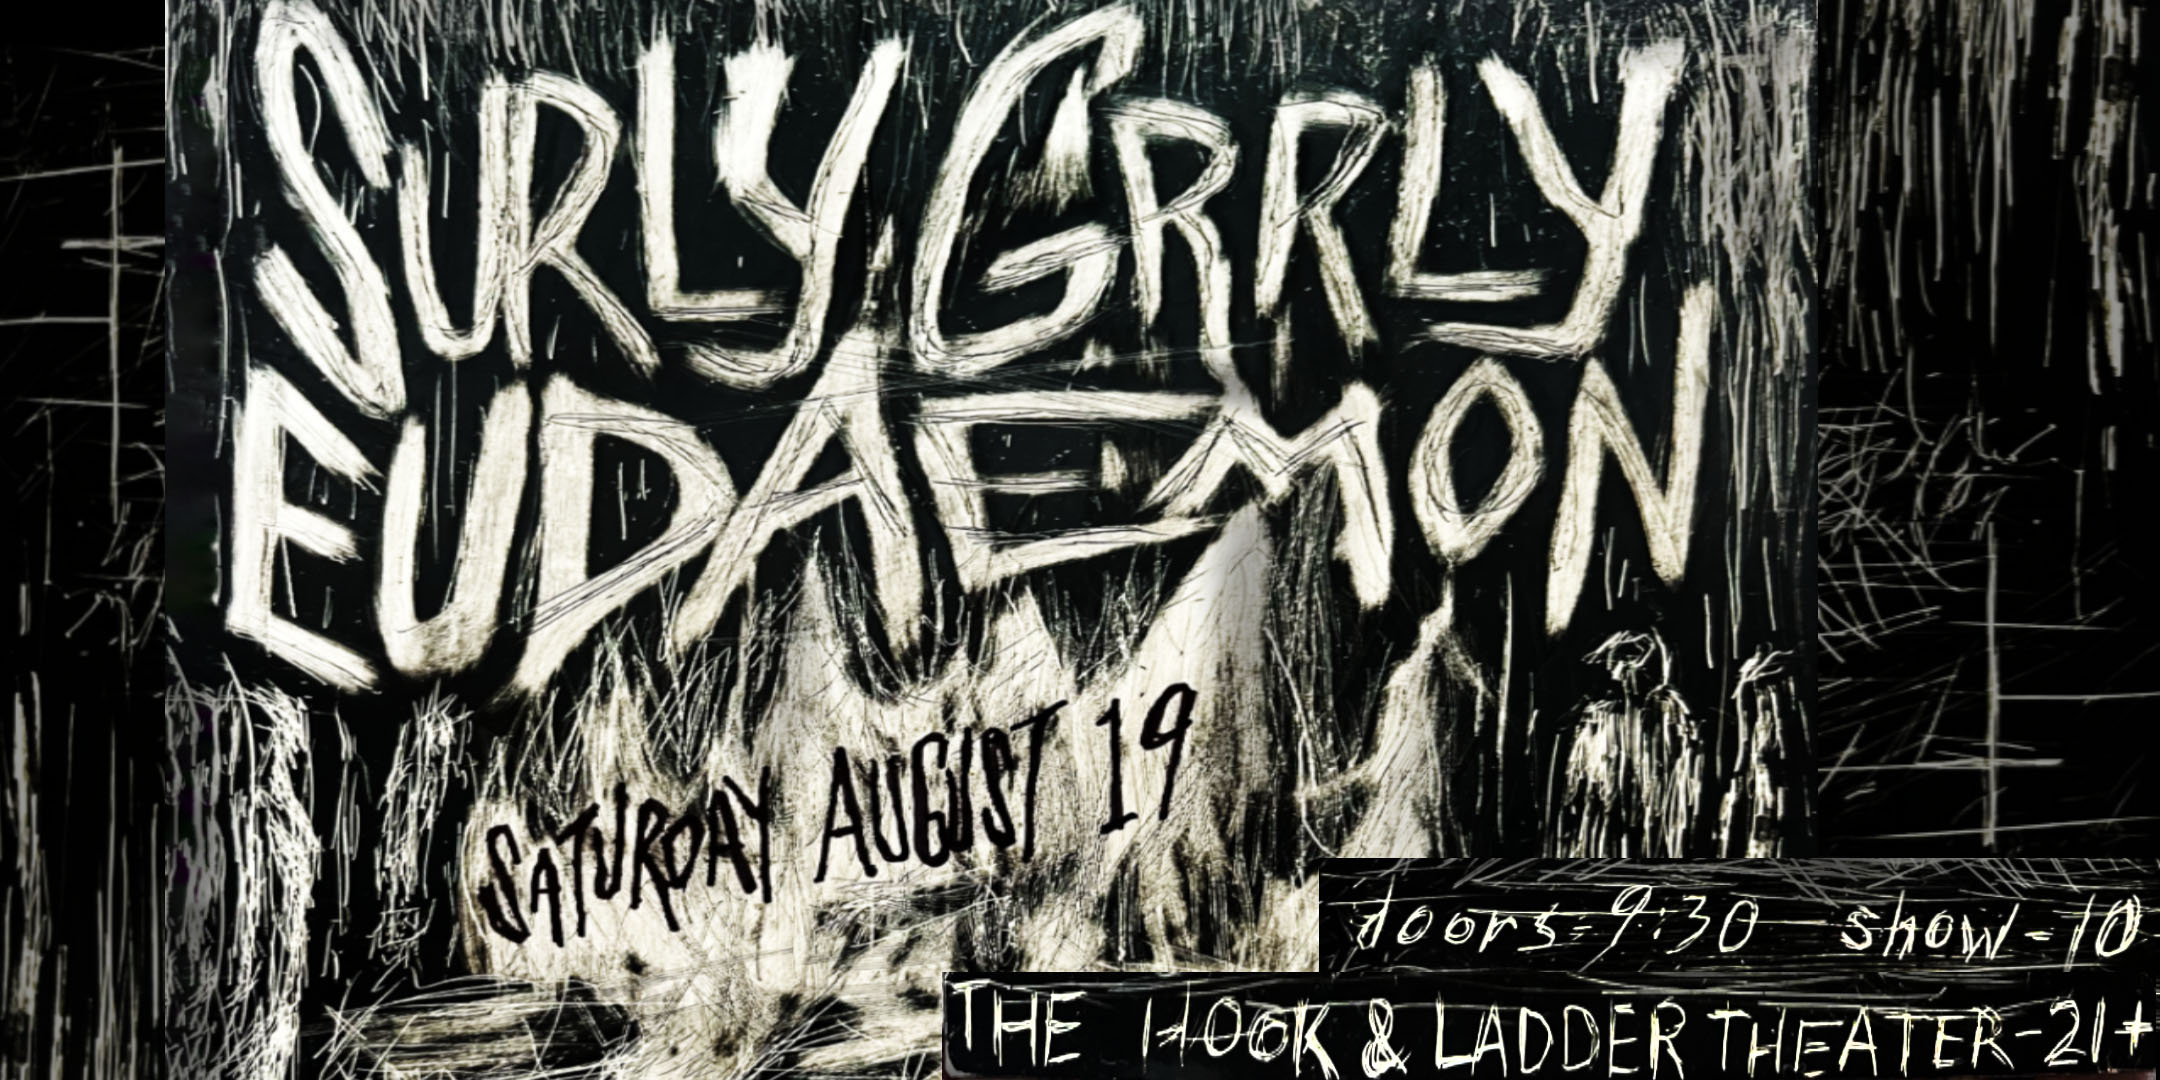 Surly Grrly w/ Eudaemon Saturday August 19 The Hook and Ladder Theater Doors 9:30pm :: Music 10:00pm :: 21+ General Admission * $15 ADV / $20 DOS * Does not include fees NO REFUNDS